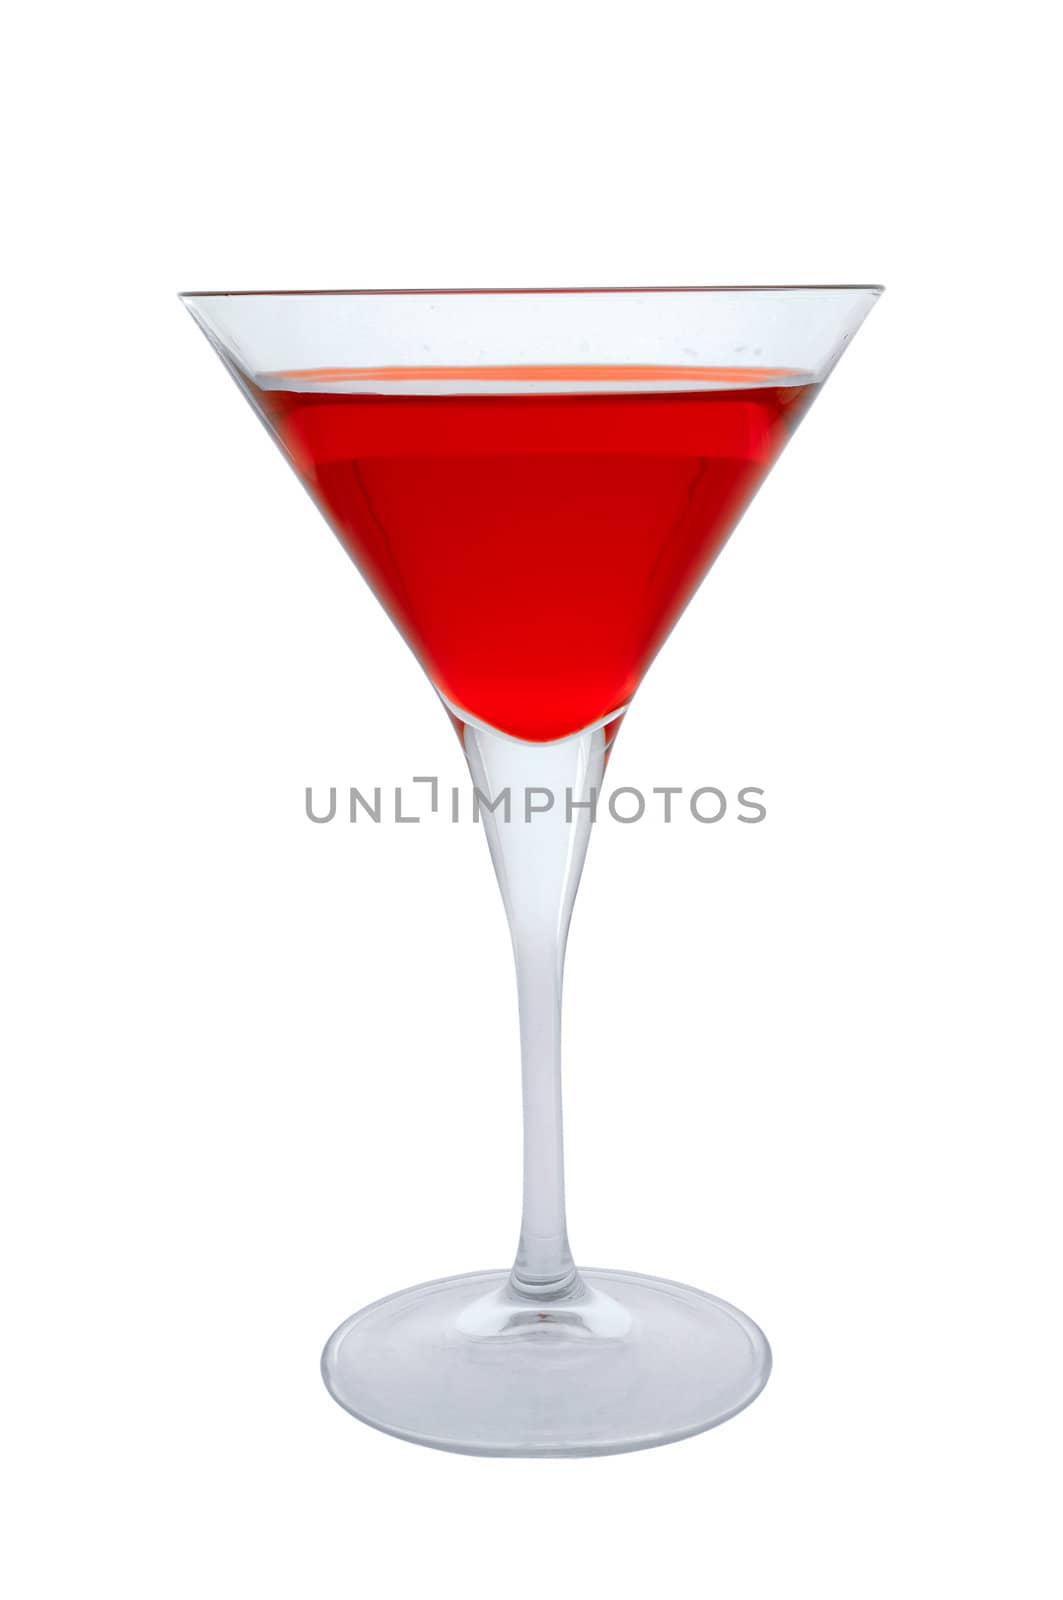 Red cocktail glass on a clean white background.